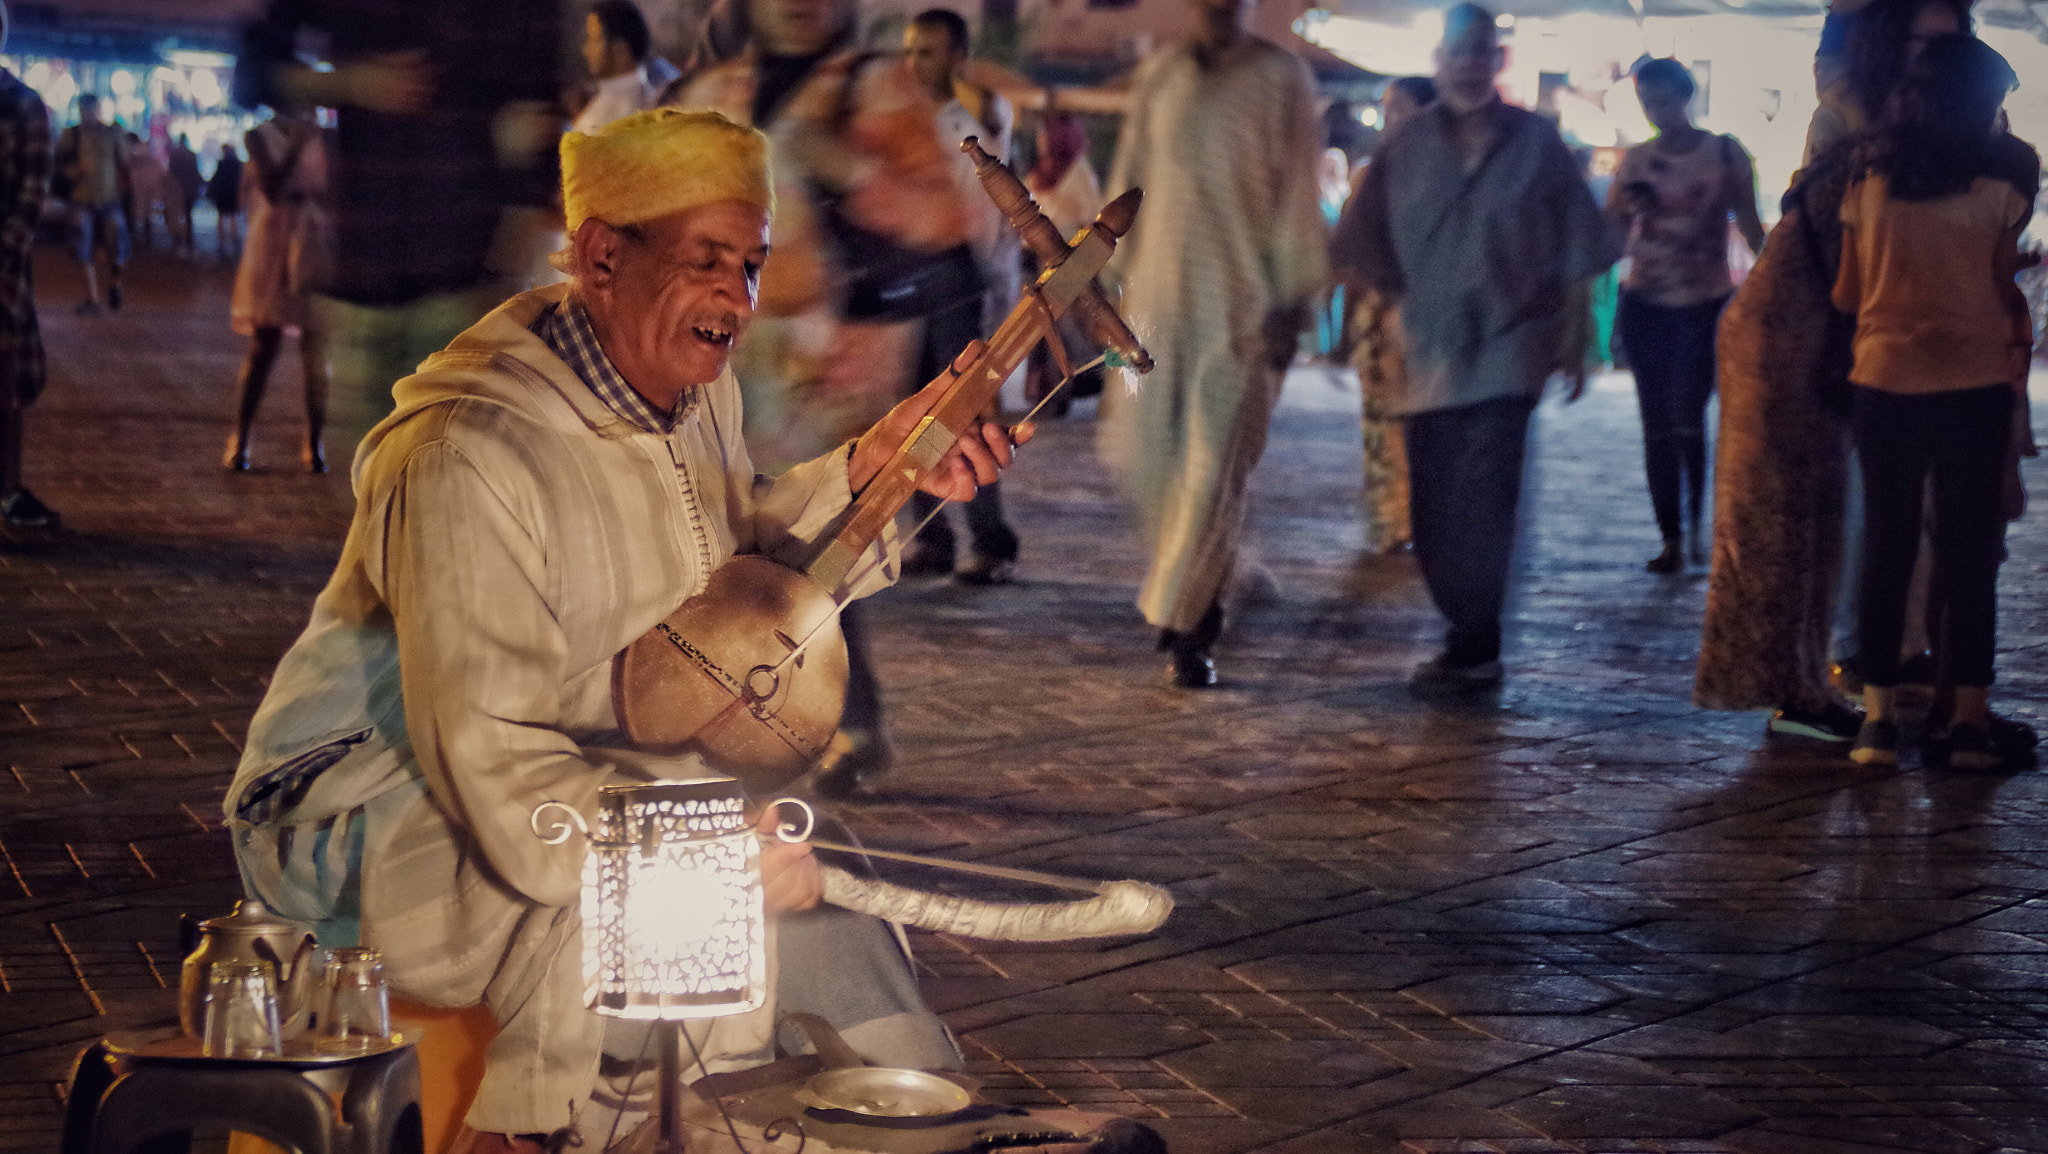 Pentax K-01 sample photo. Moroccain traditional music in the street photography